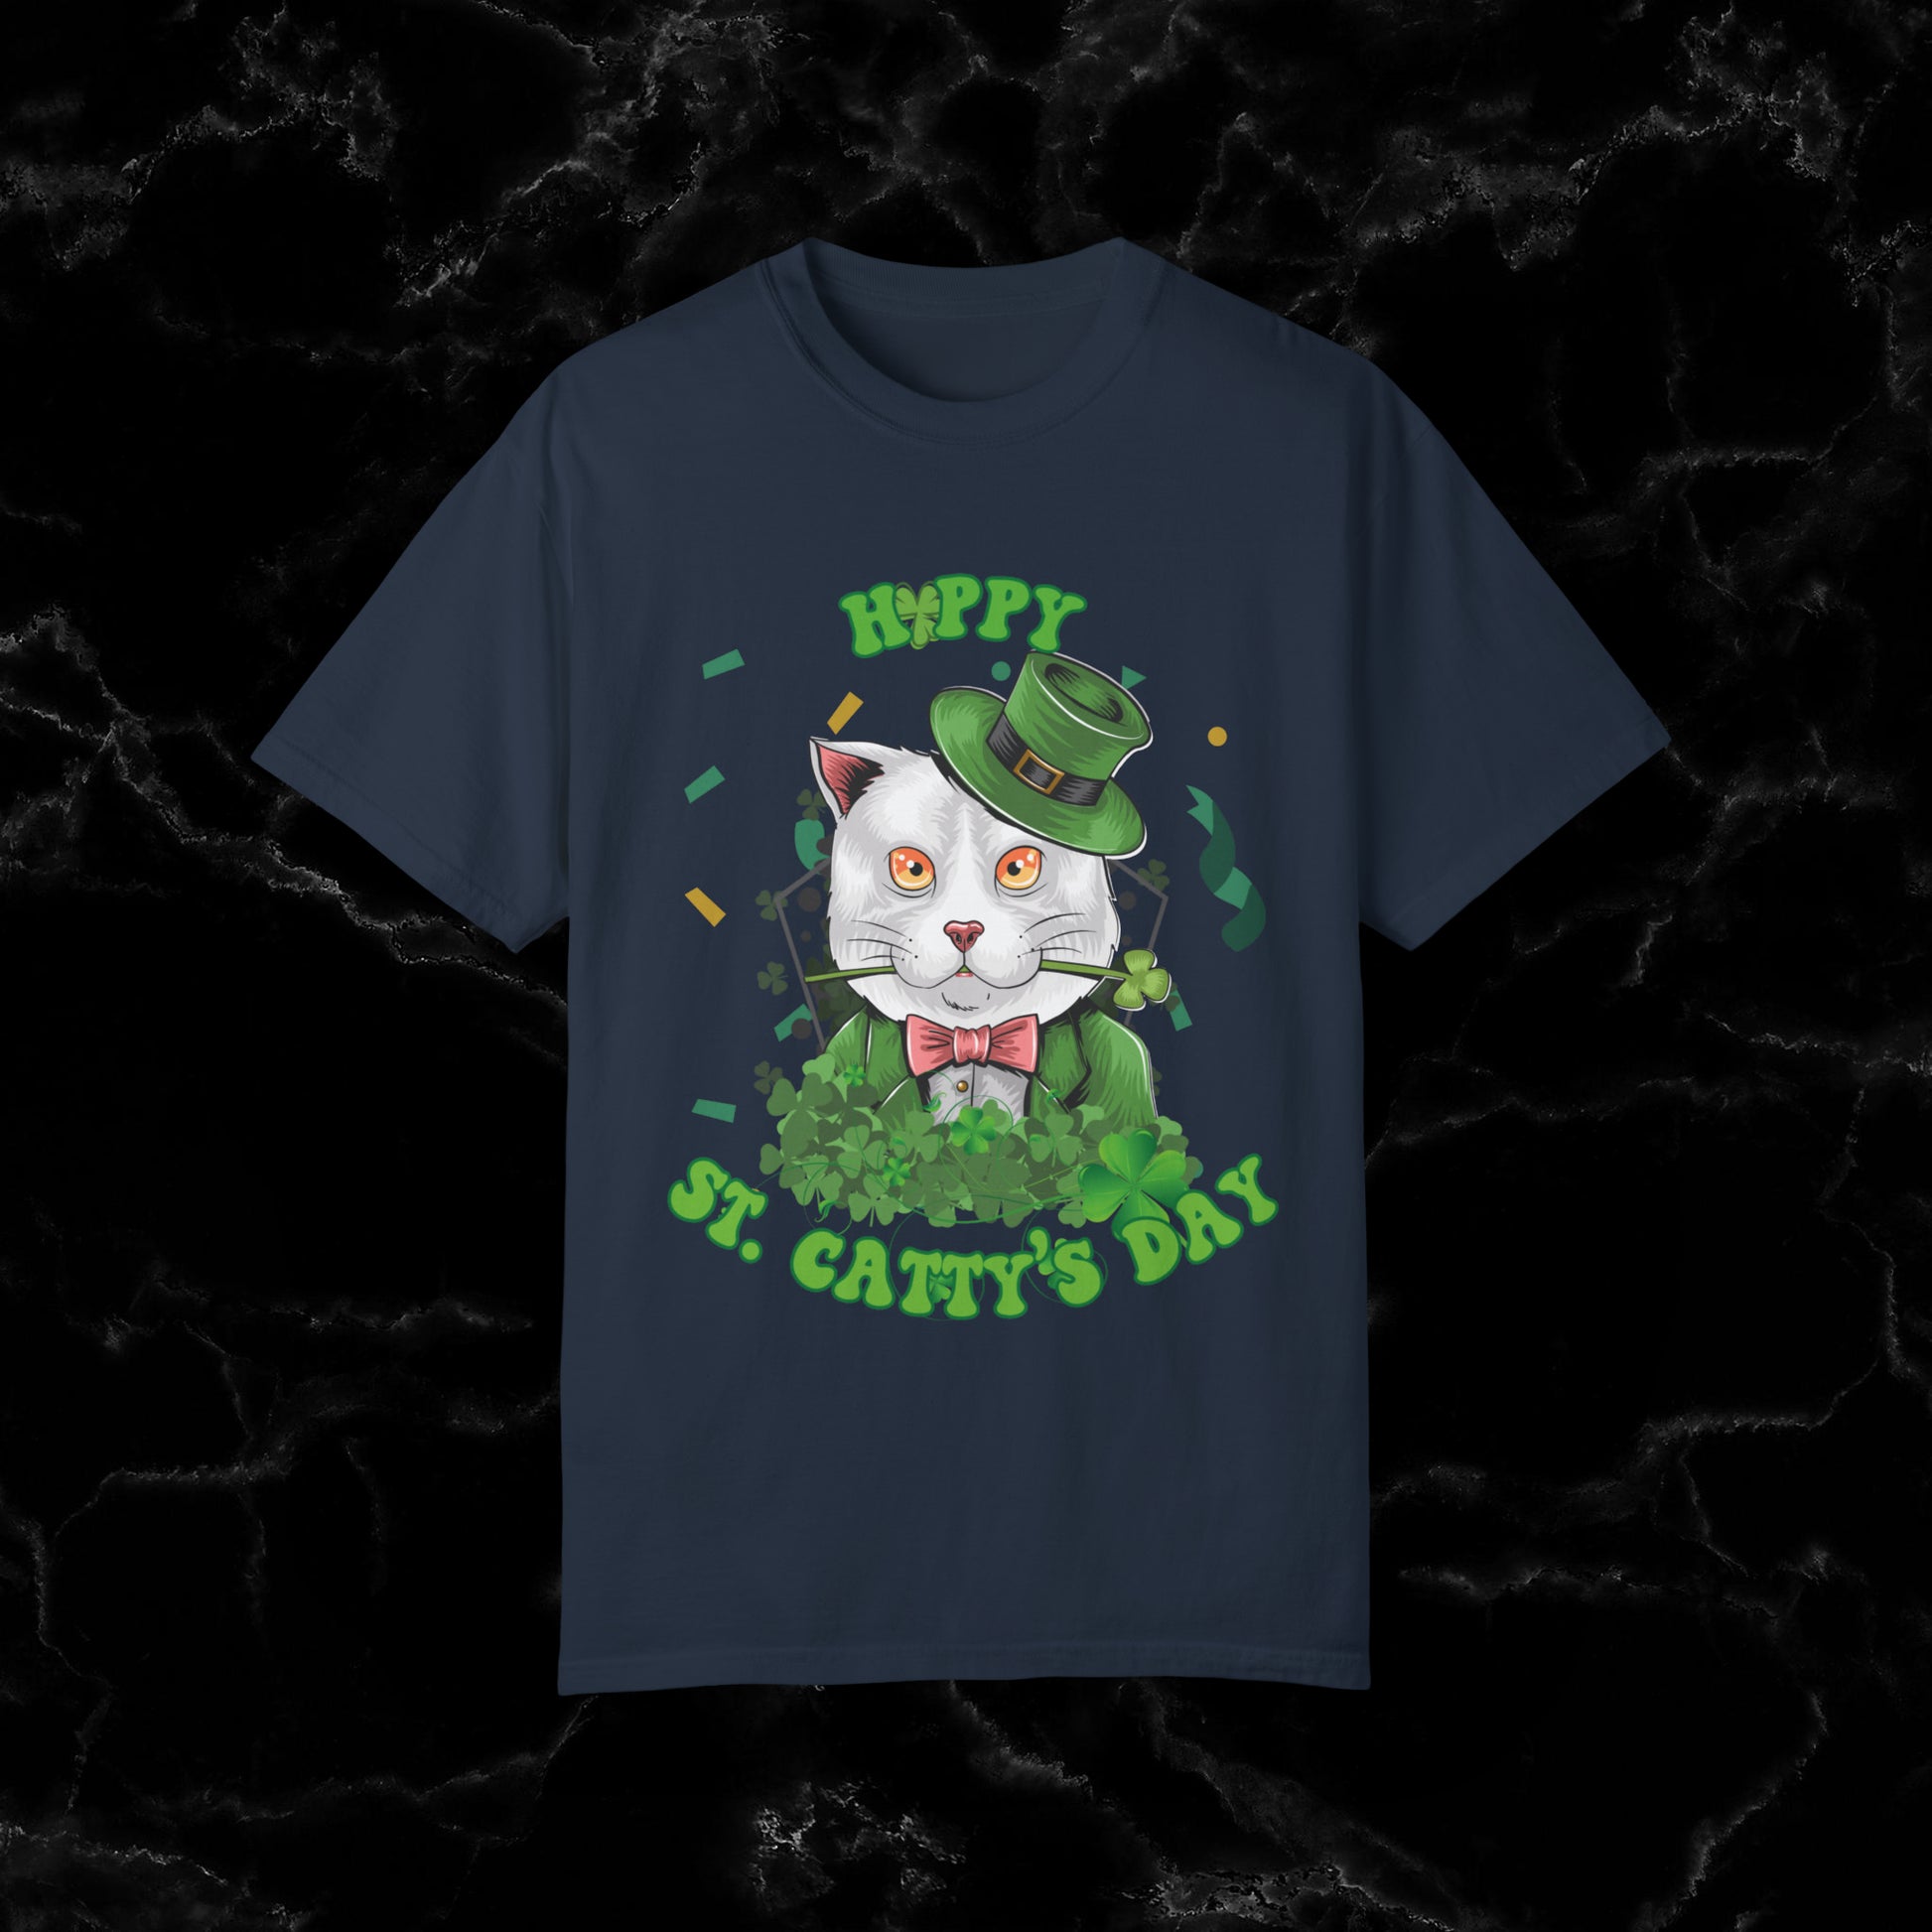 Happy St. Catty's Day Funny St. Patrick's Day Comfort Colors T-Shirt - St. Paddy's Day Shirt for Cat Lover St. Patty's Day Fun T-Shirt Navy S 